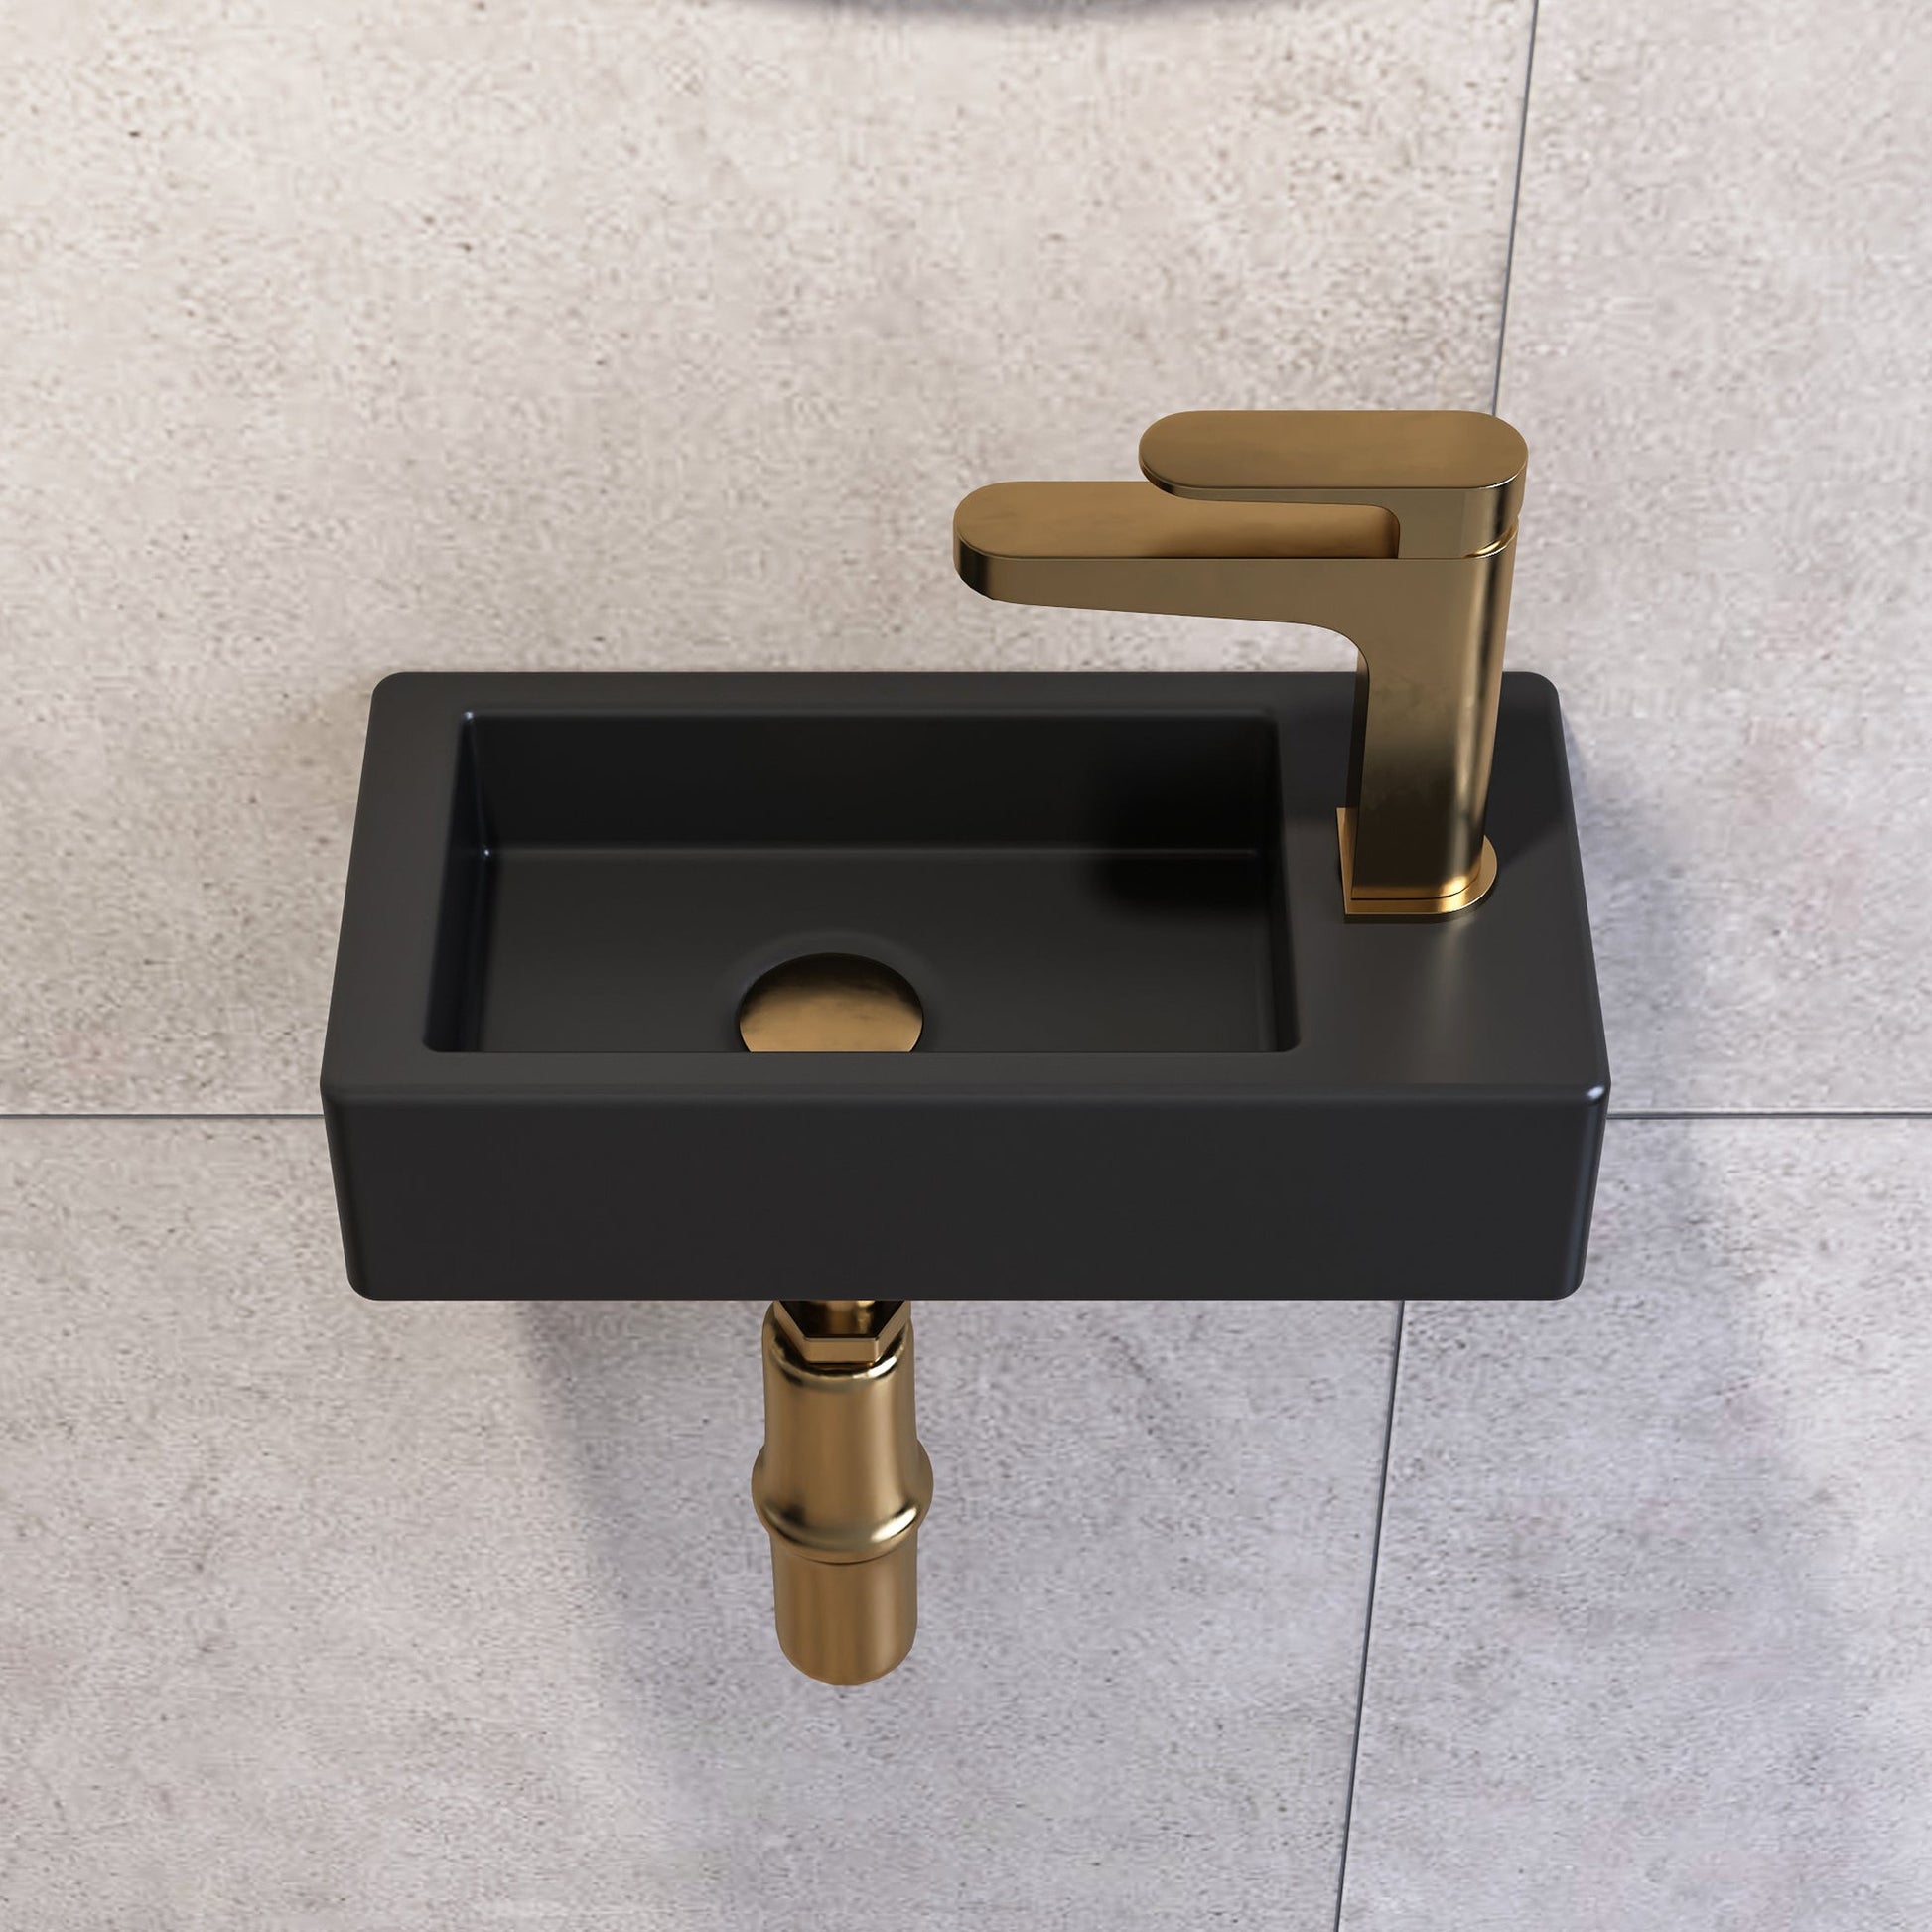 DeerValley Liberty 14" Rectangular Black Space-saving Wall-Mounted Bathroom Sink With Right Faucet Hole